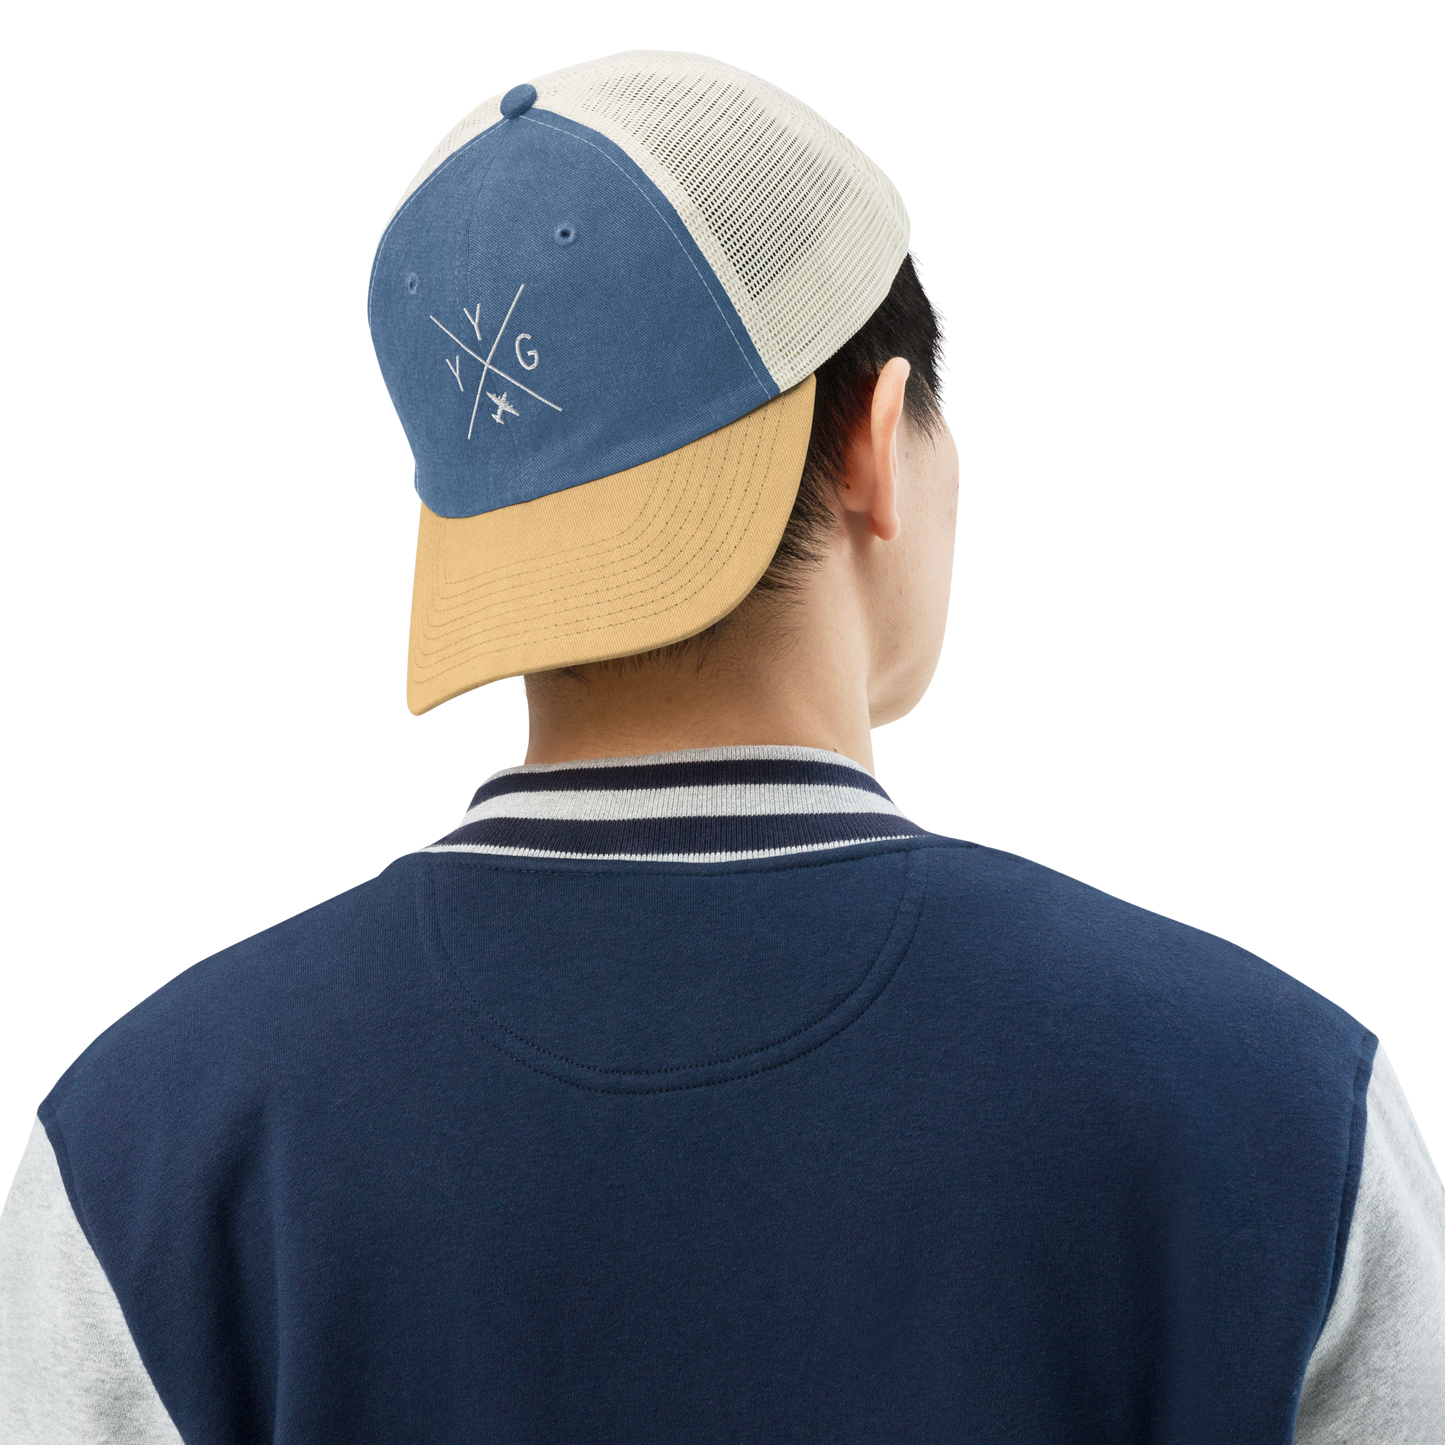 YHM Designs - YYG Charlottetown Pigment-Dyed Trucker Cap - Crossed-X Design with Airport Code and Vintage Propliner - White Embroidery - Image 04